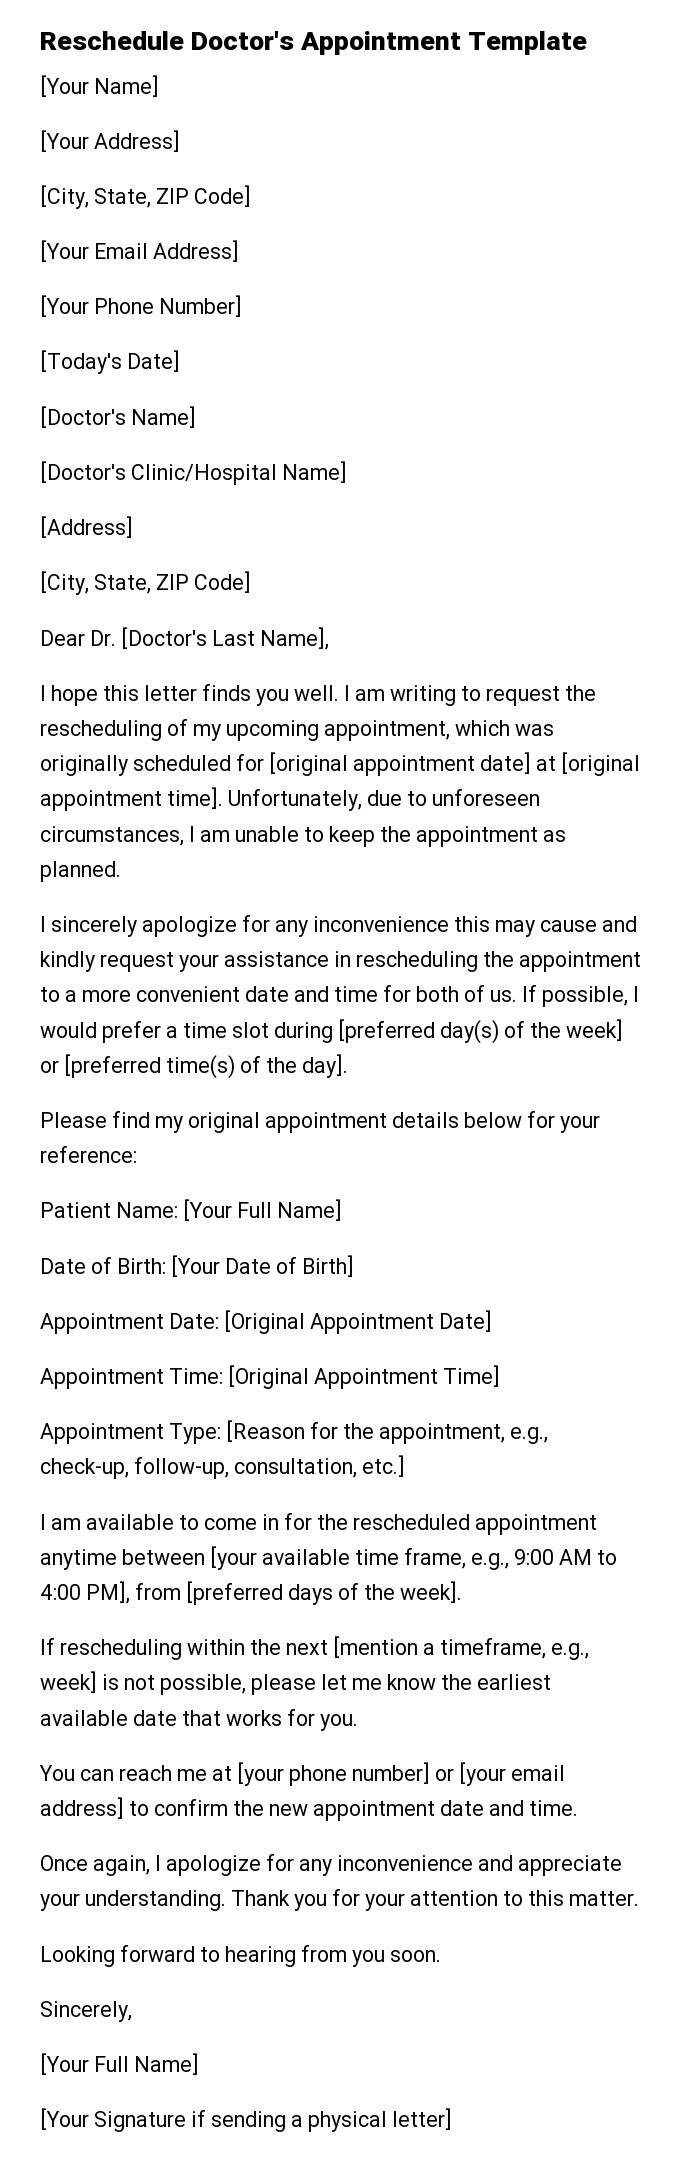 Reschedule Doctor's Appointment Template